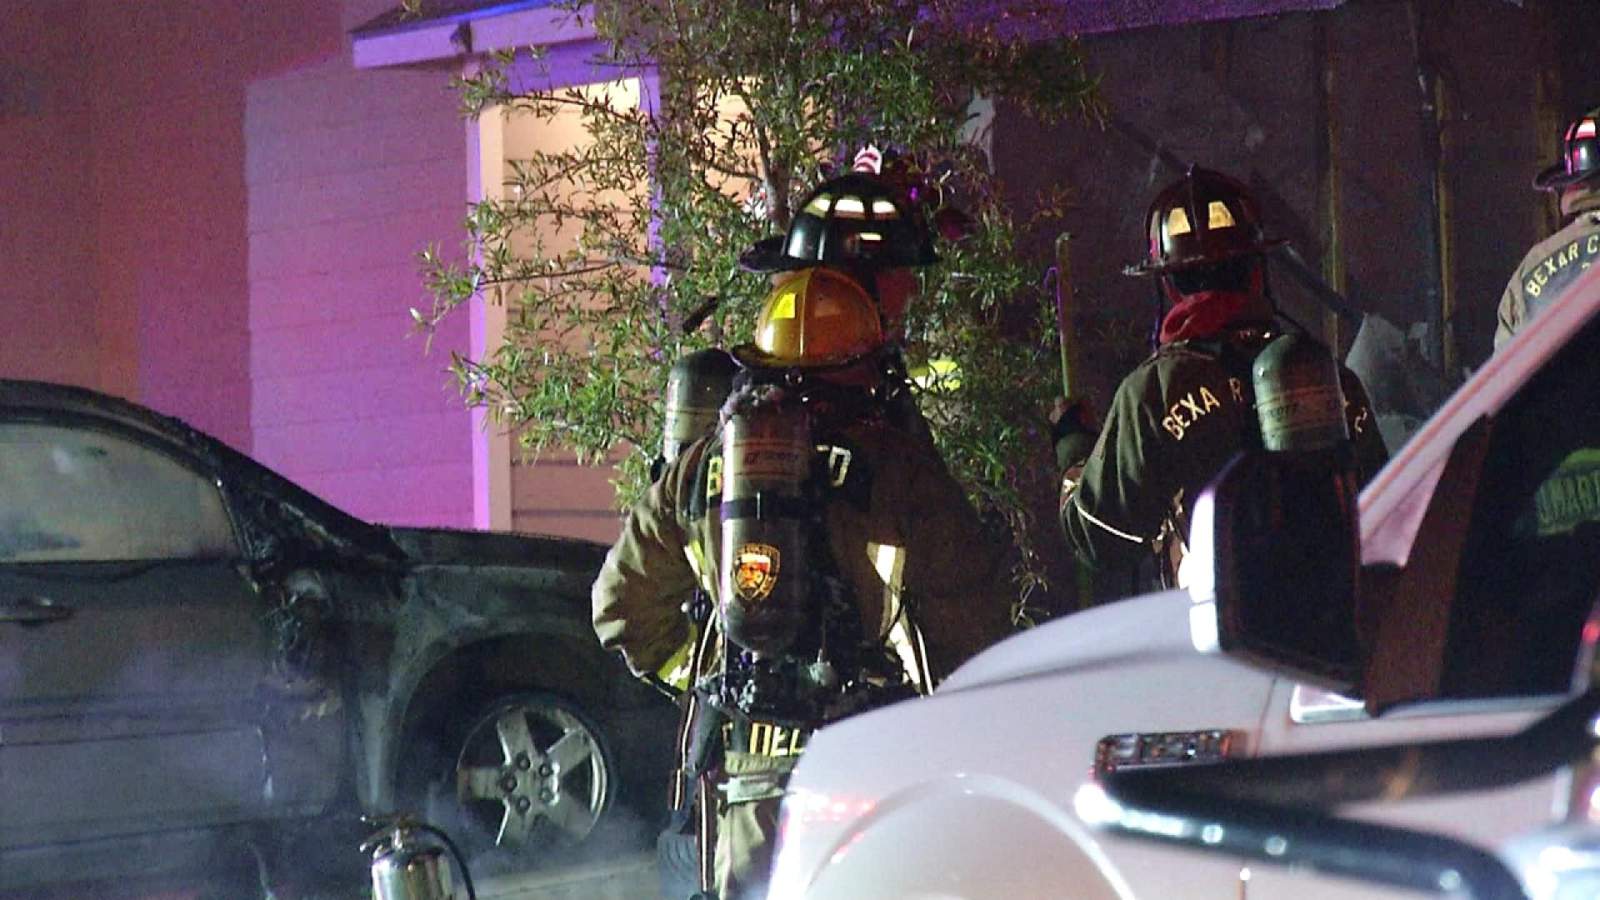 Far West Side garage fire spread to vehicle in driveway, firefighters say